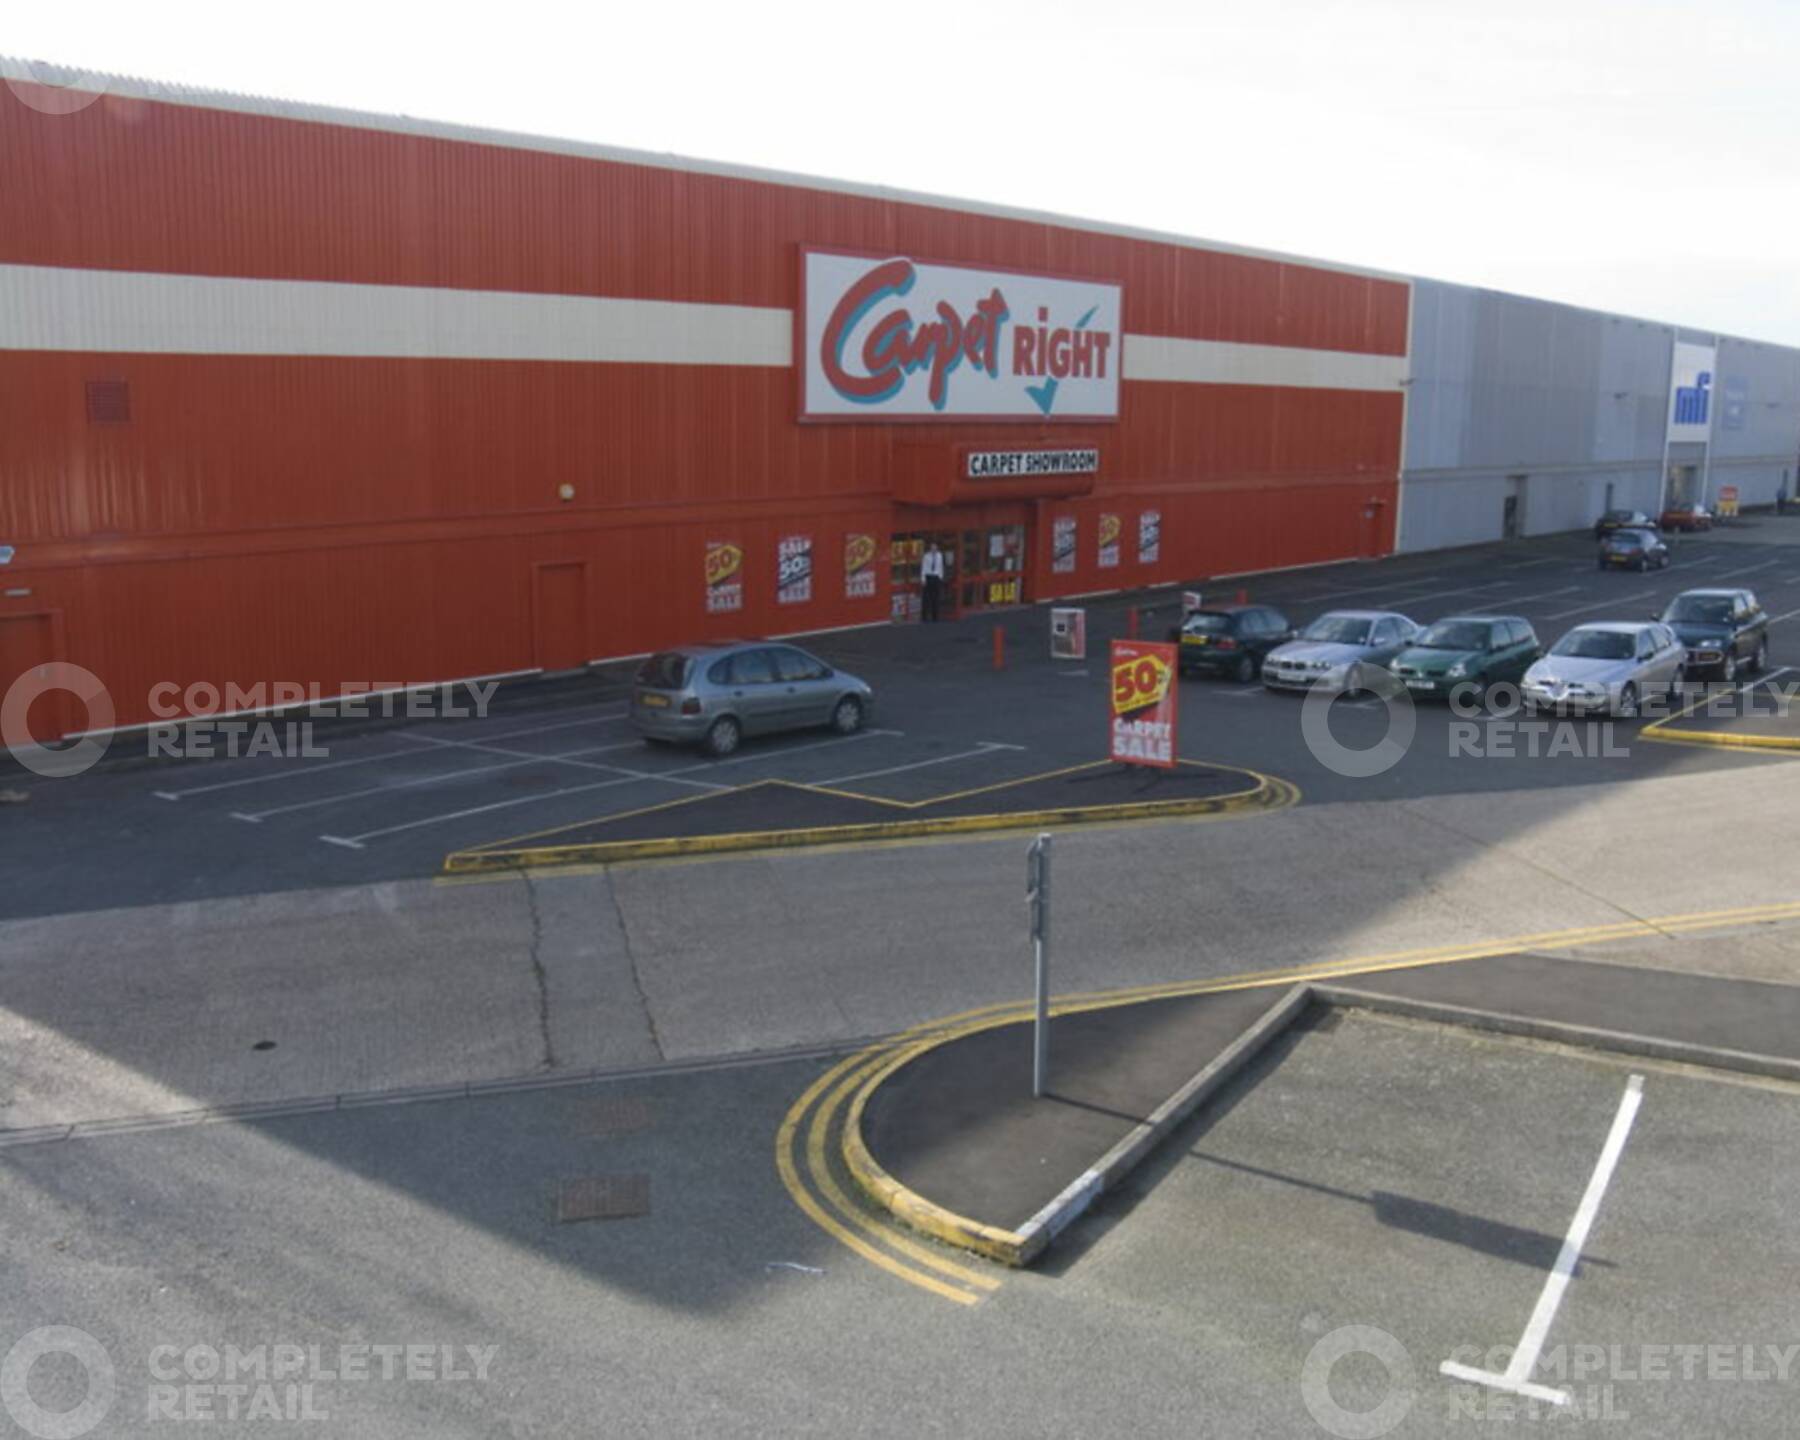 Bexhill Road Retail Park